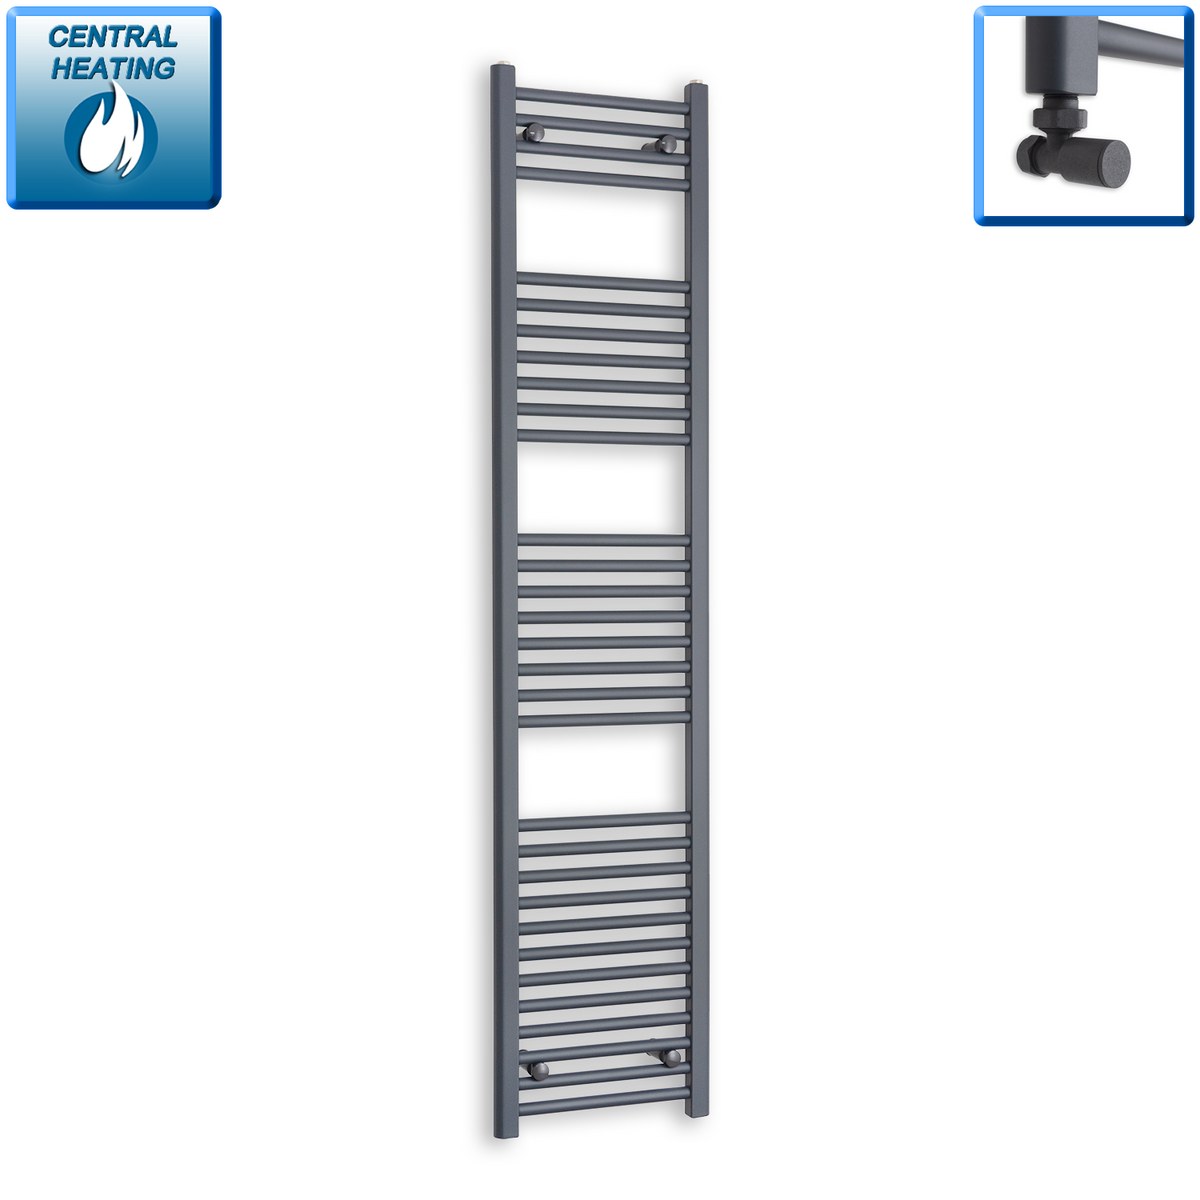 1800 x 400 Heated Straight Anthracite-Sand Grey Towel Radiator central heating